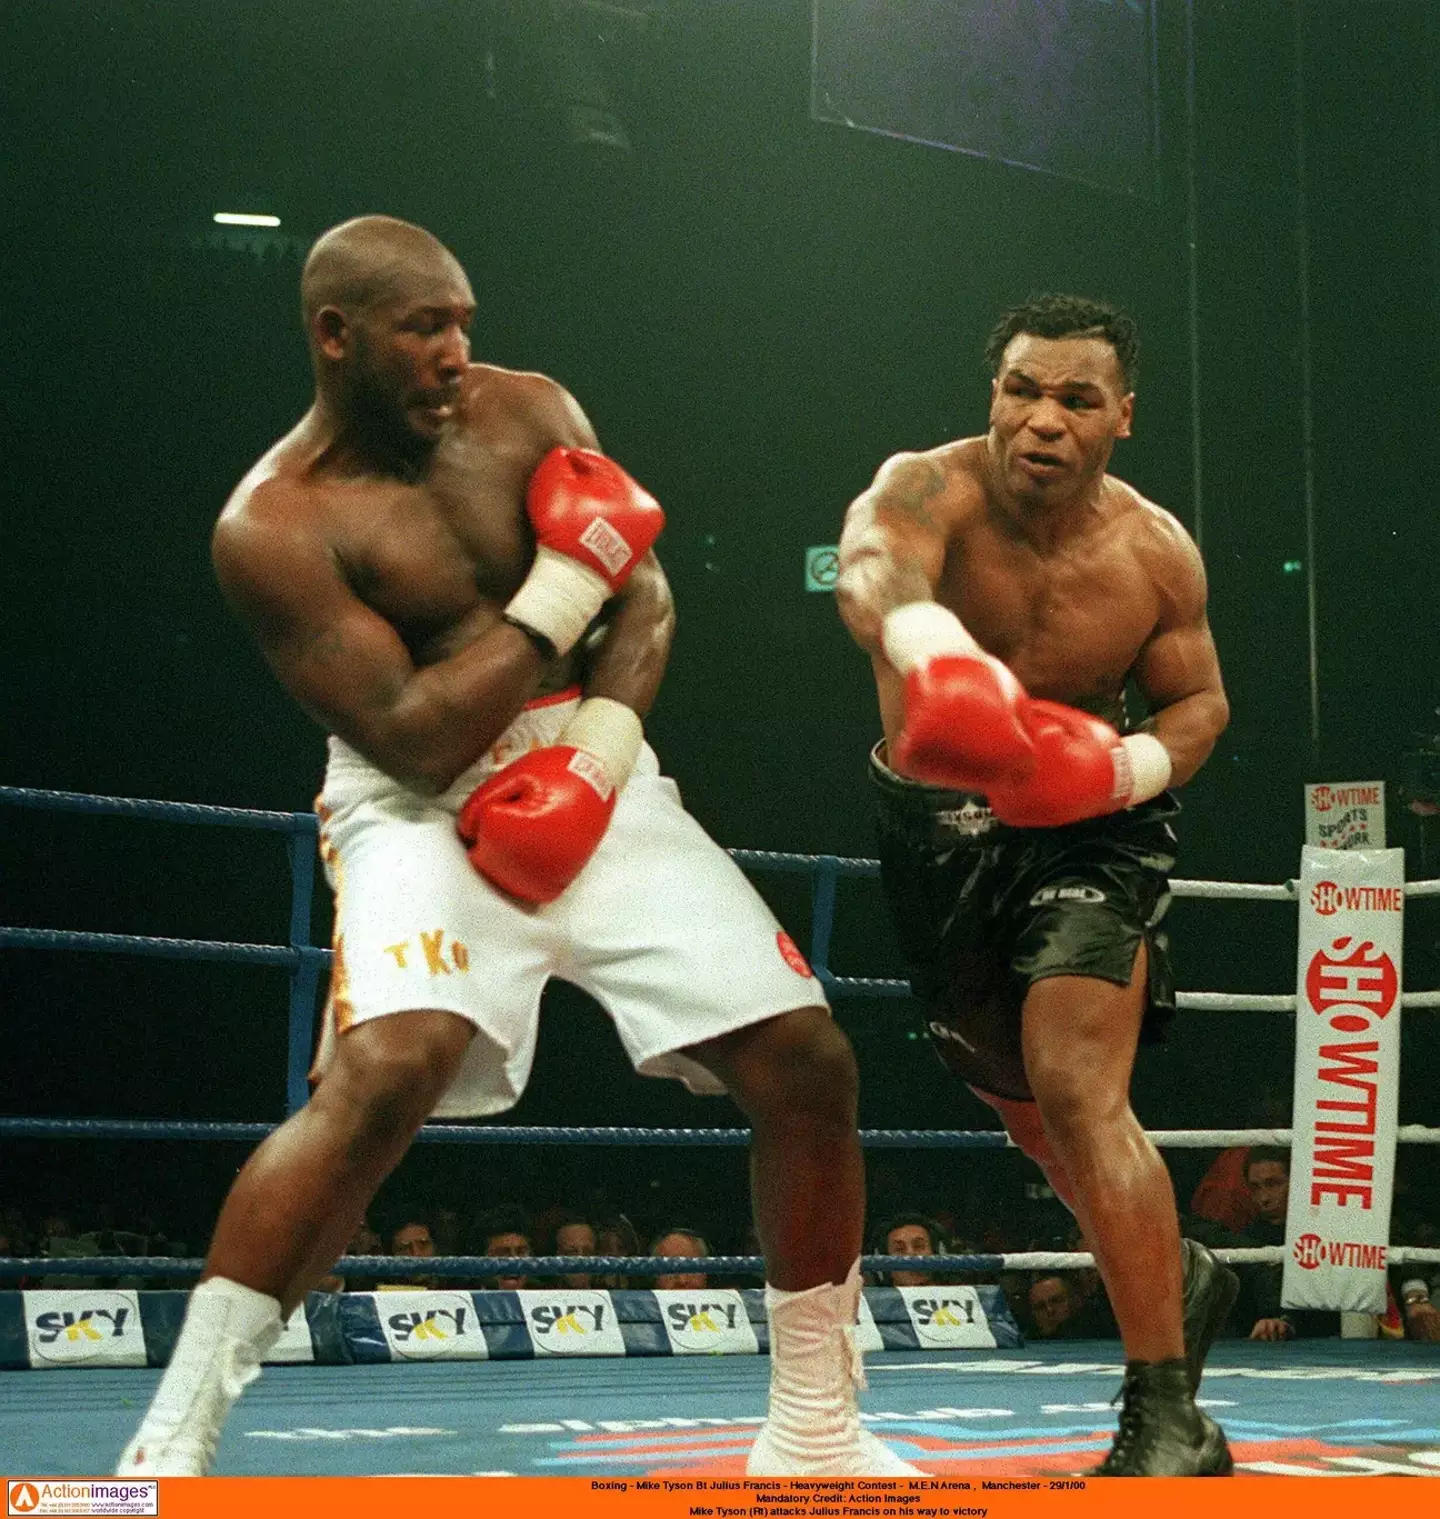 Francis faced off against Mike Tyson in the noughties.